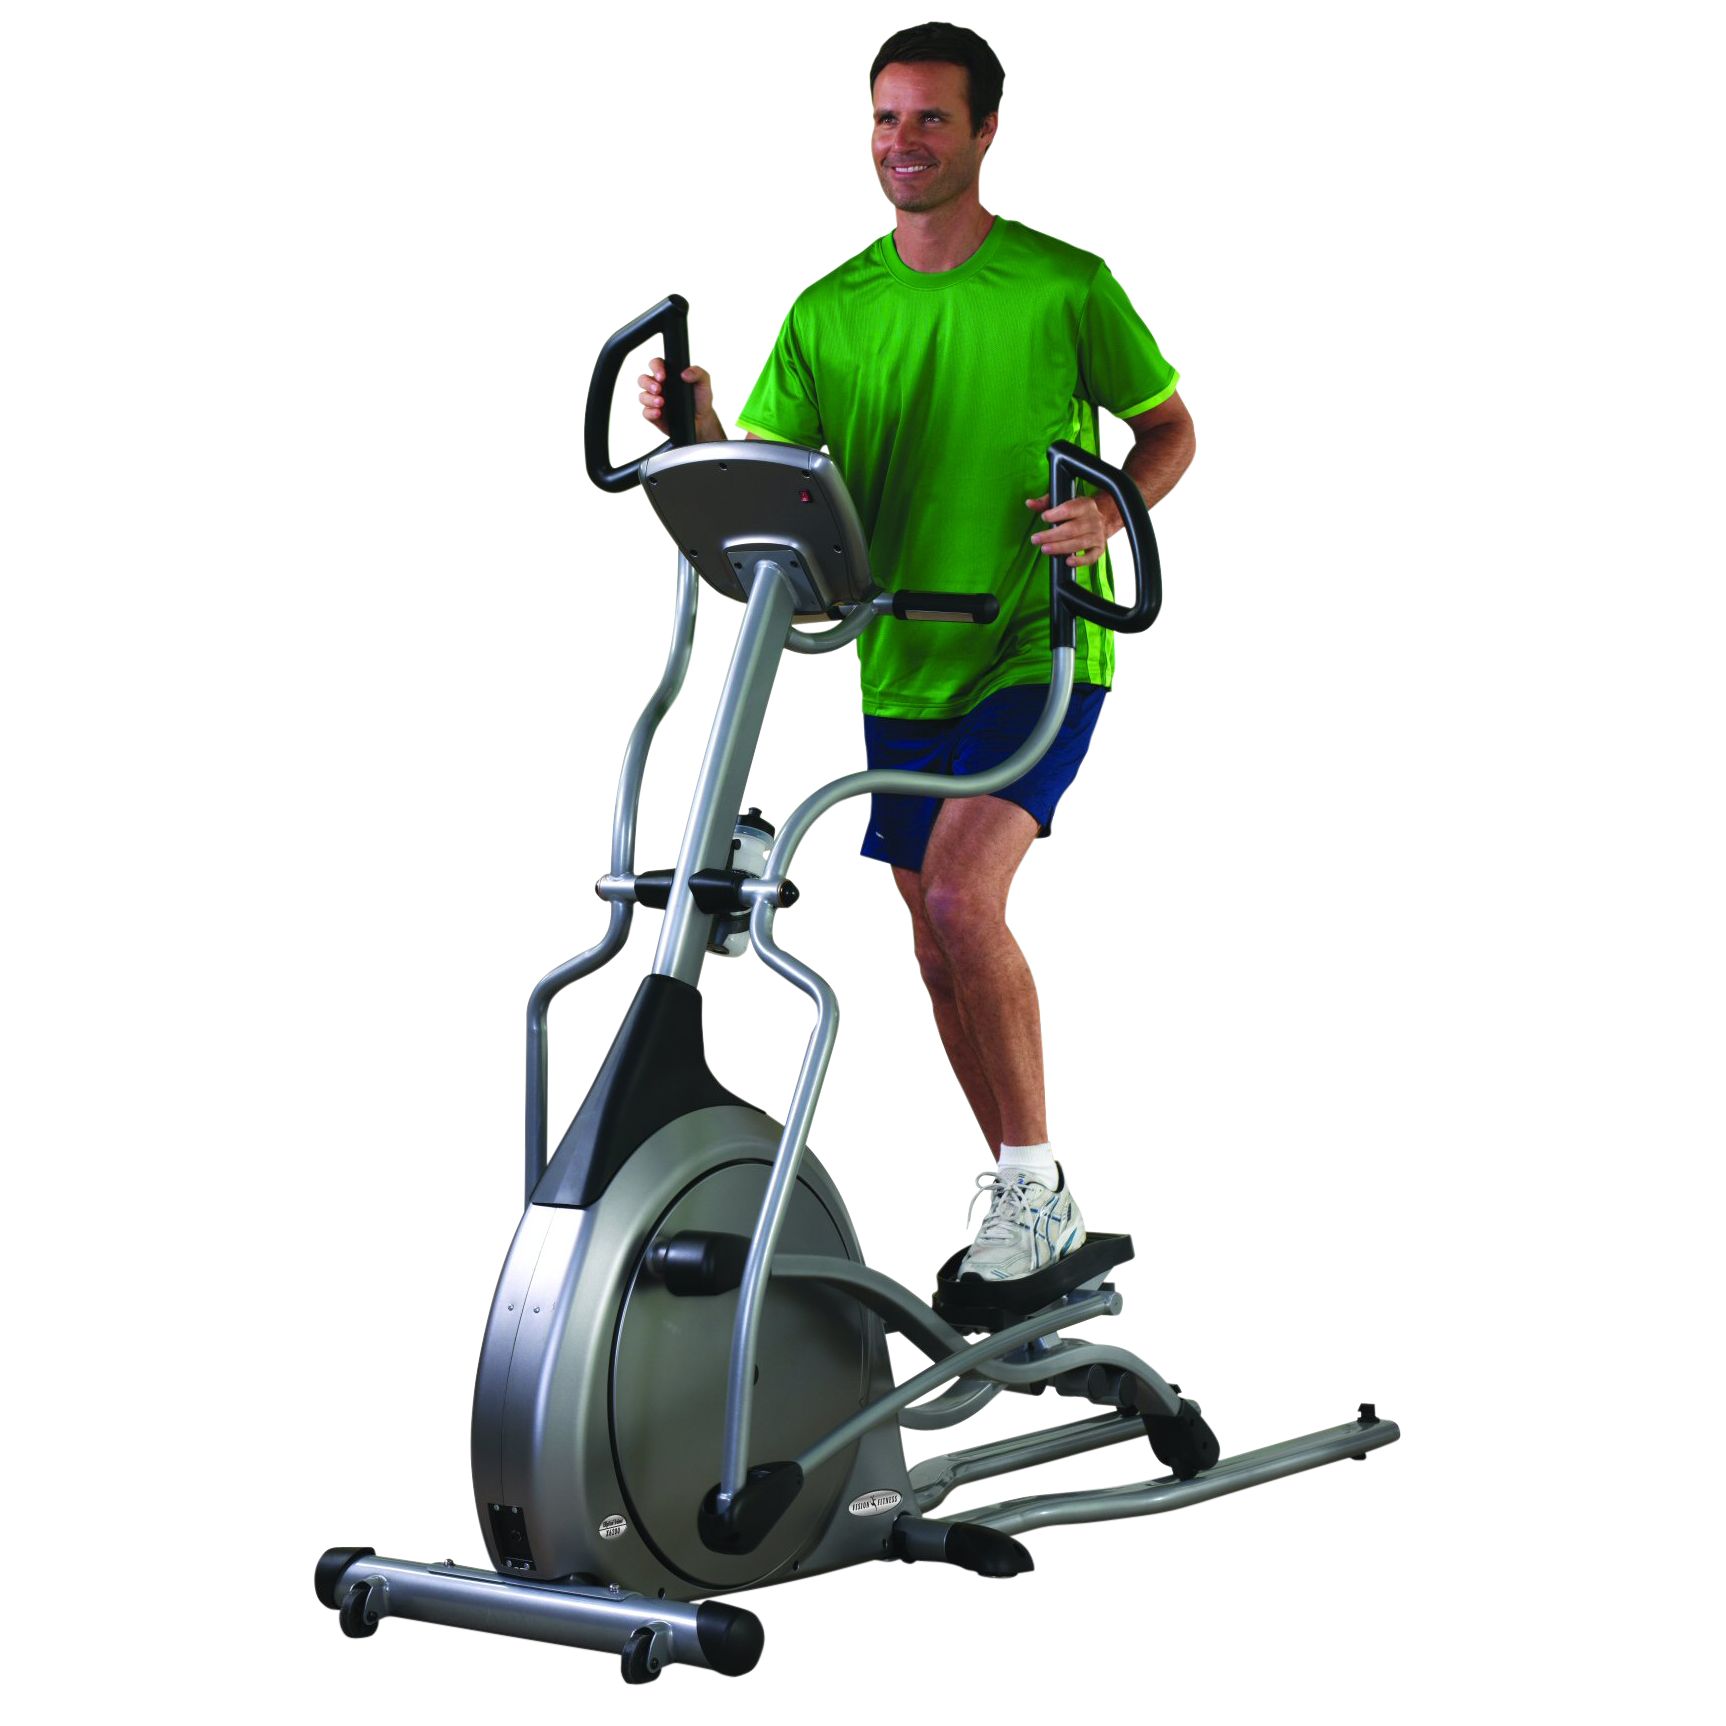 Vision Fitness X6200 Folding Elliptical Trainer with Premier Console at John Lewis